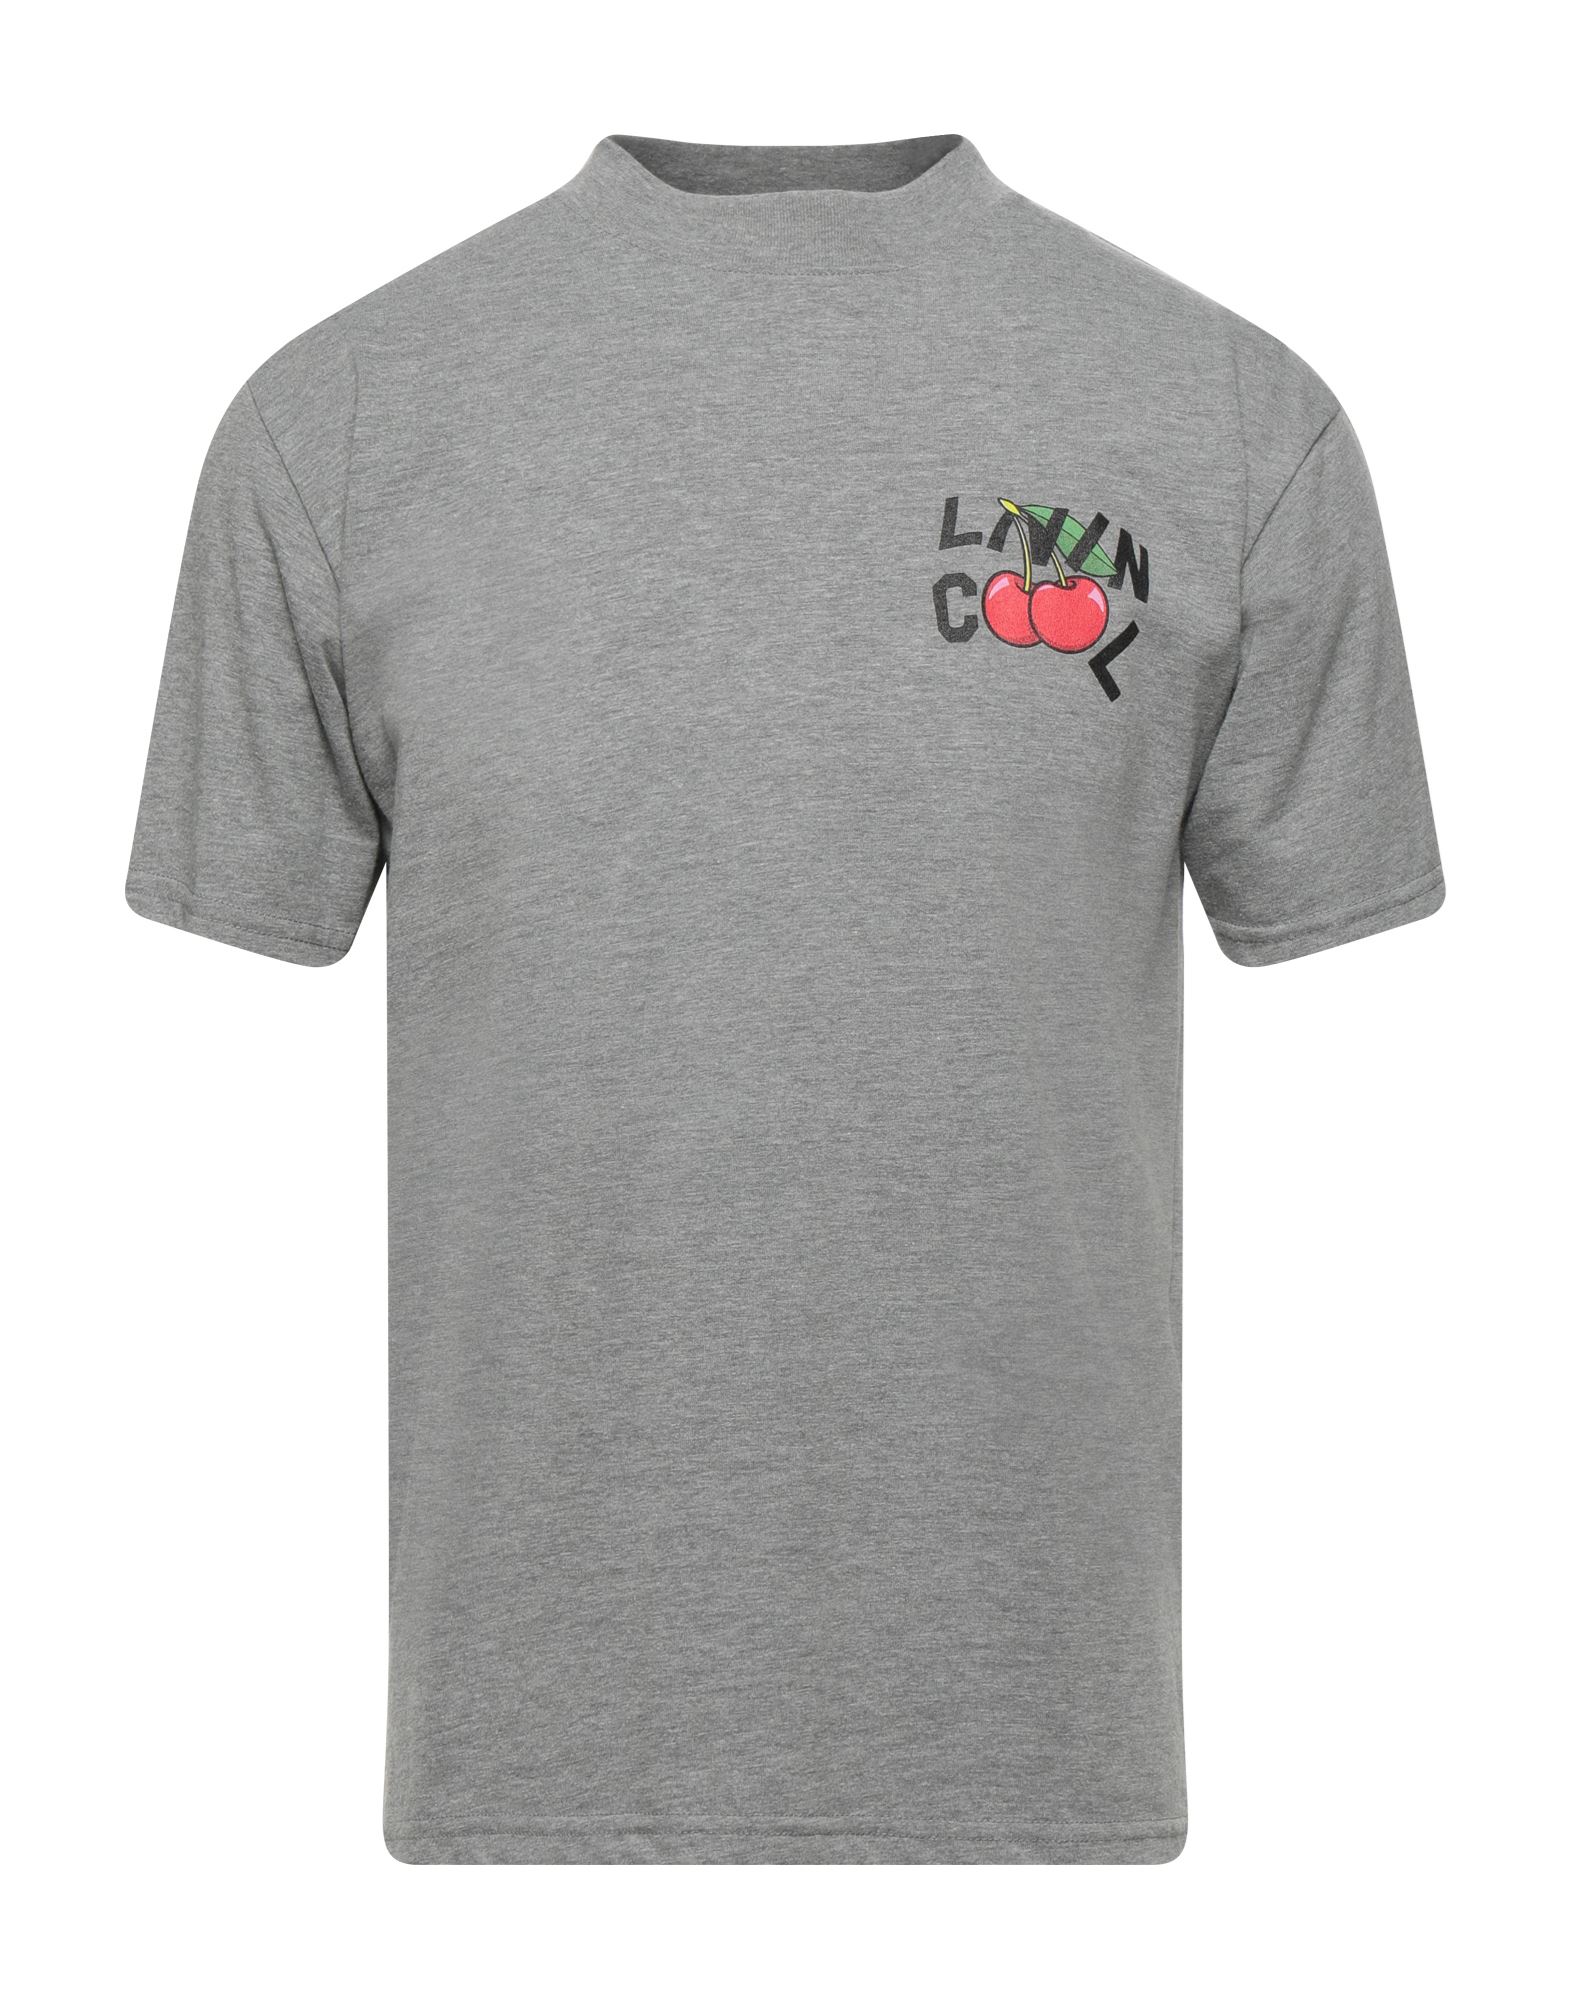 Livincool T-shirts In Grey